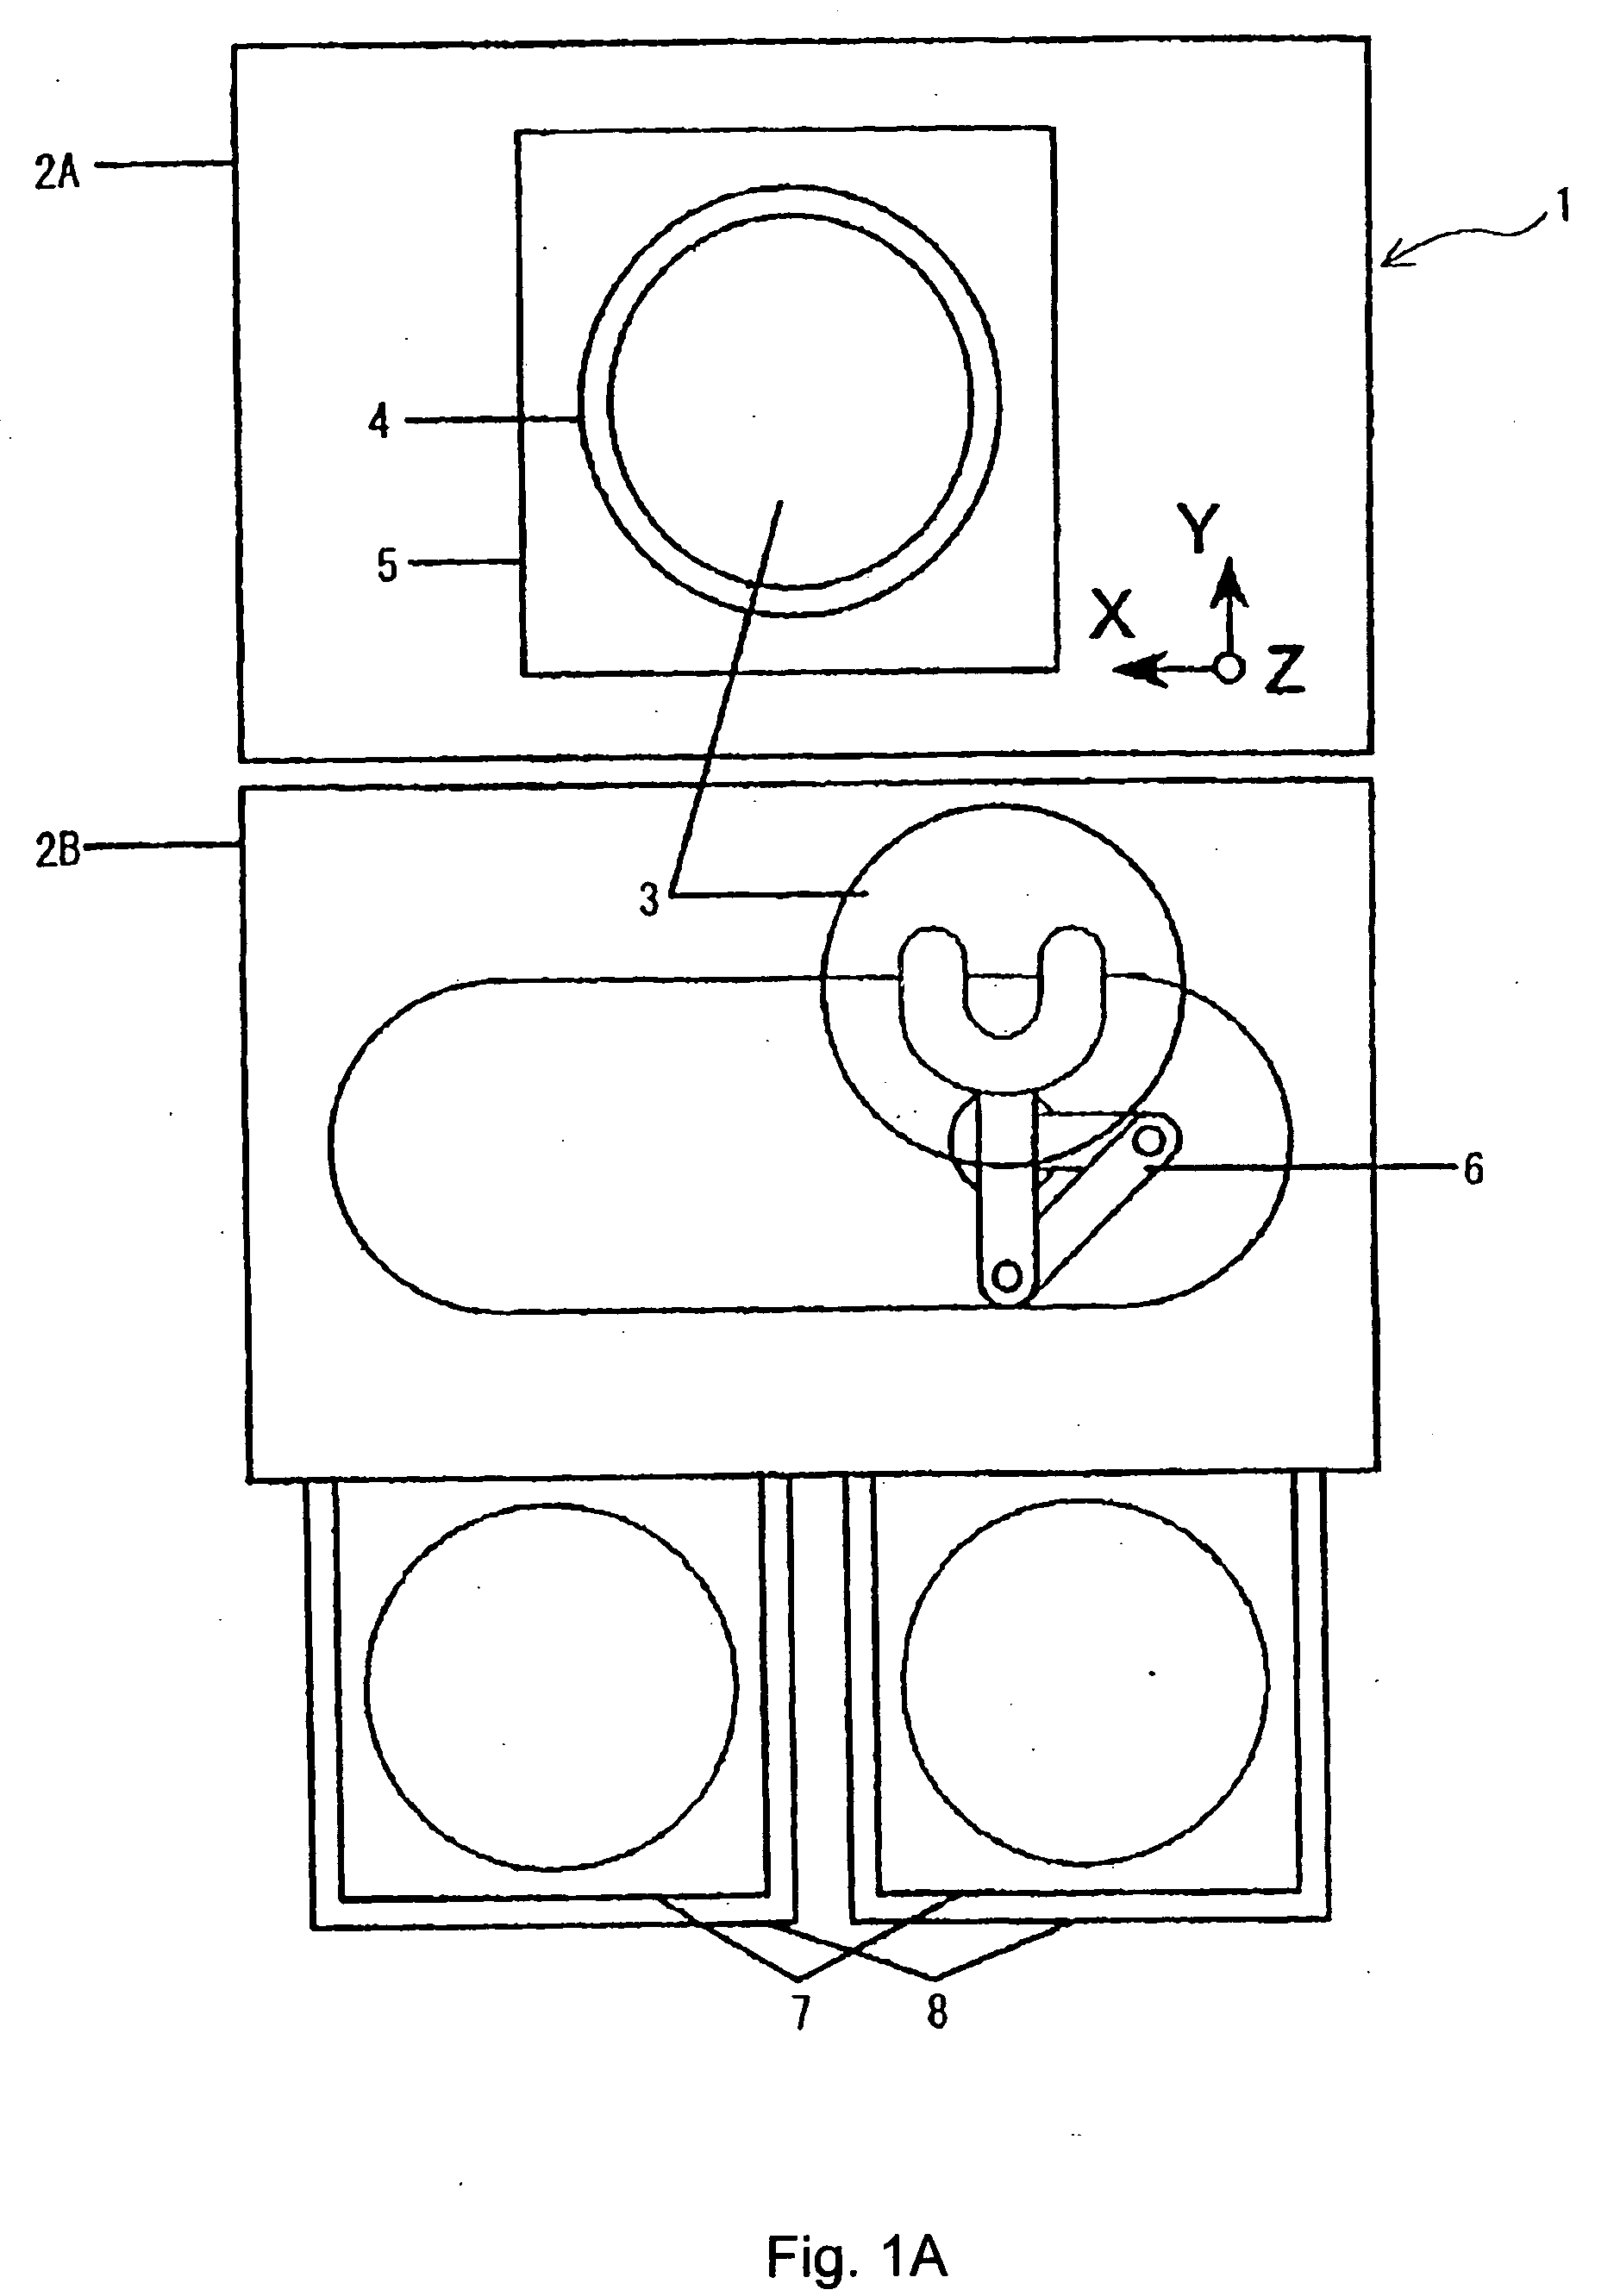 Substrate inspection apparatus and method